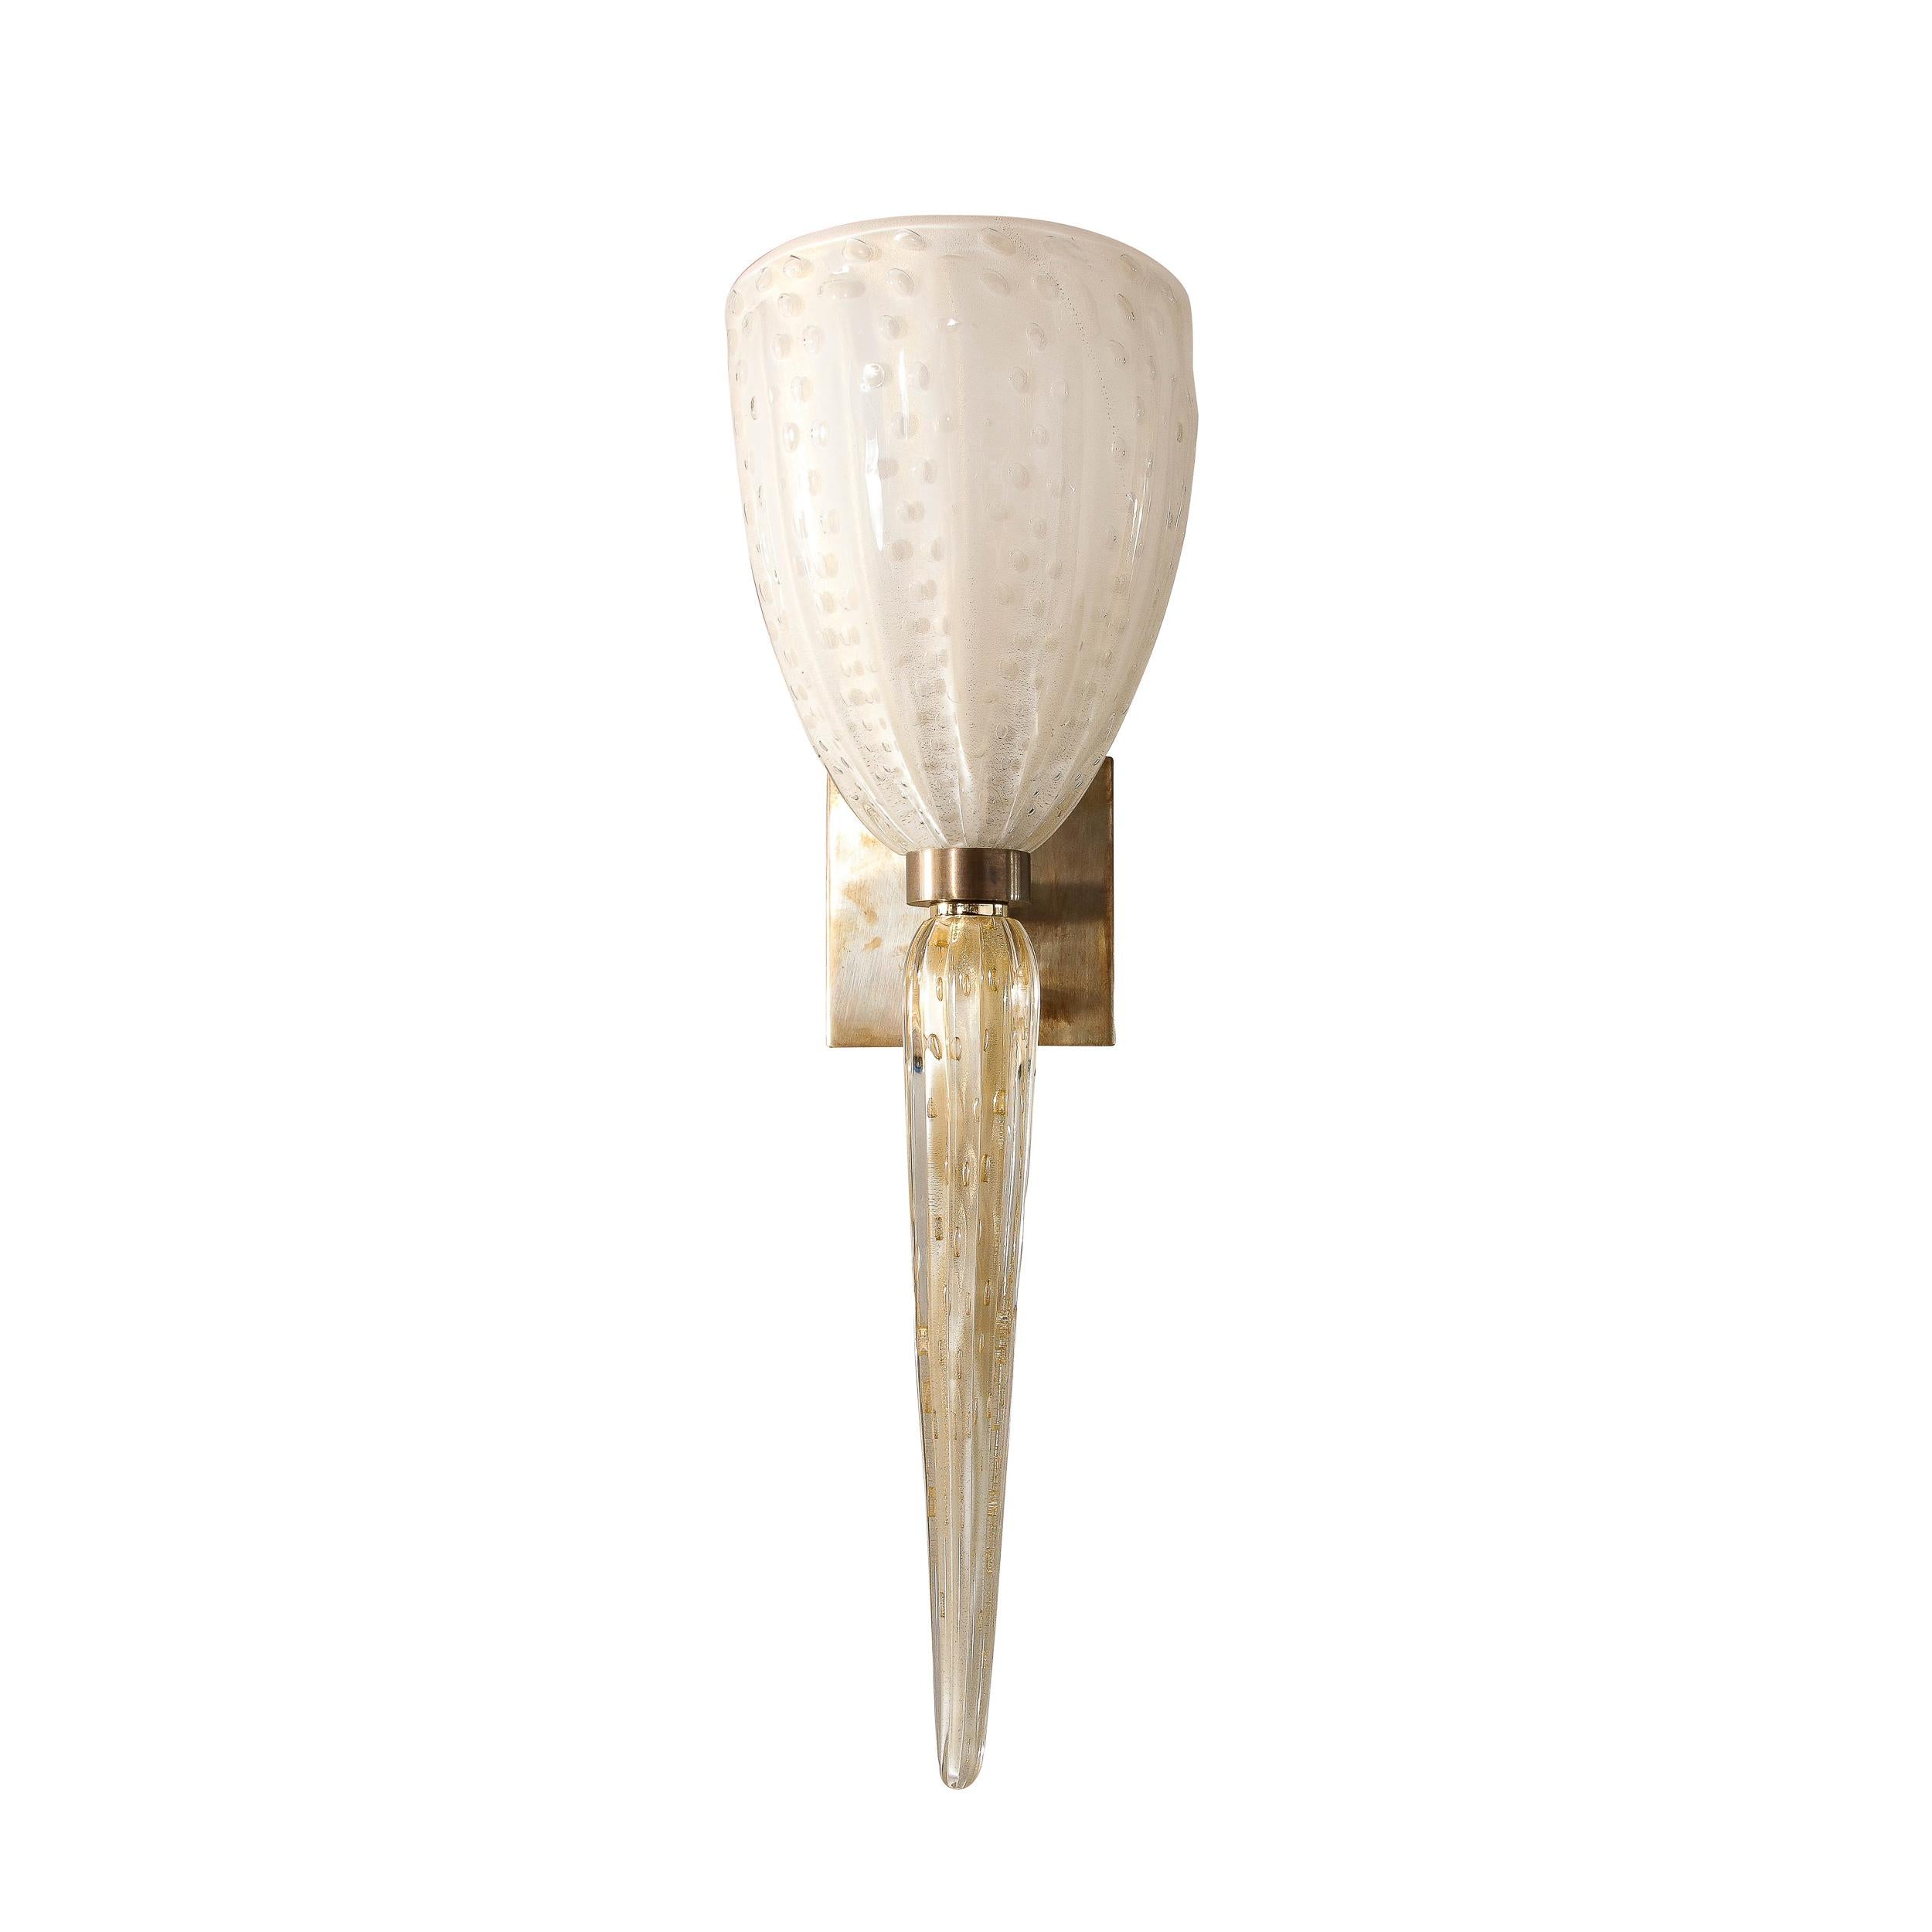 This stunning pair of modernist sconces were realized in Murano, Italy- the island off the coast of Venice renowned for centuries for its superlative glass construction. They feature tapered conical urn form shades in opalescent white Murano glass